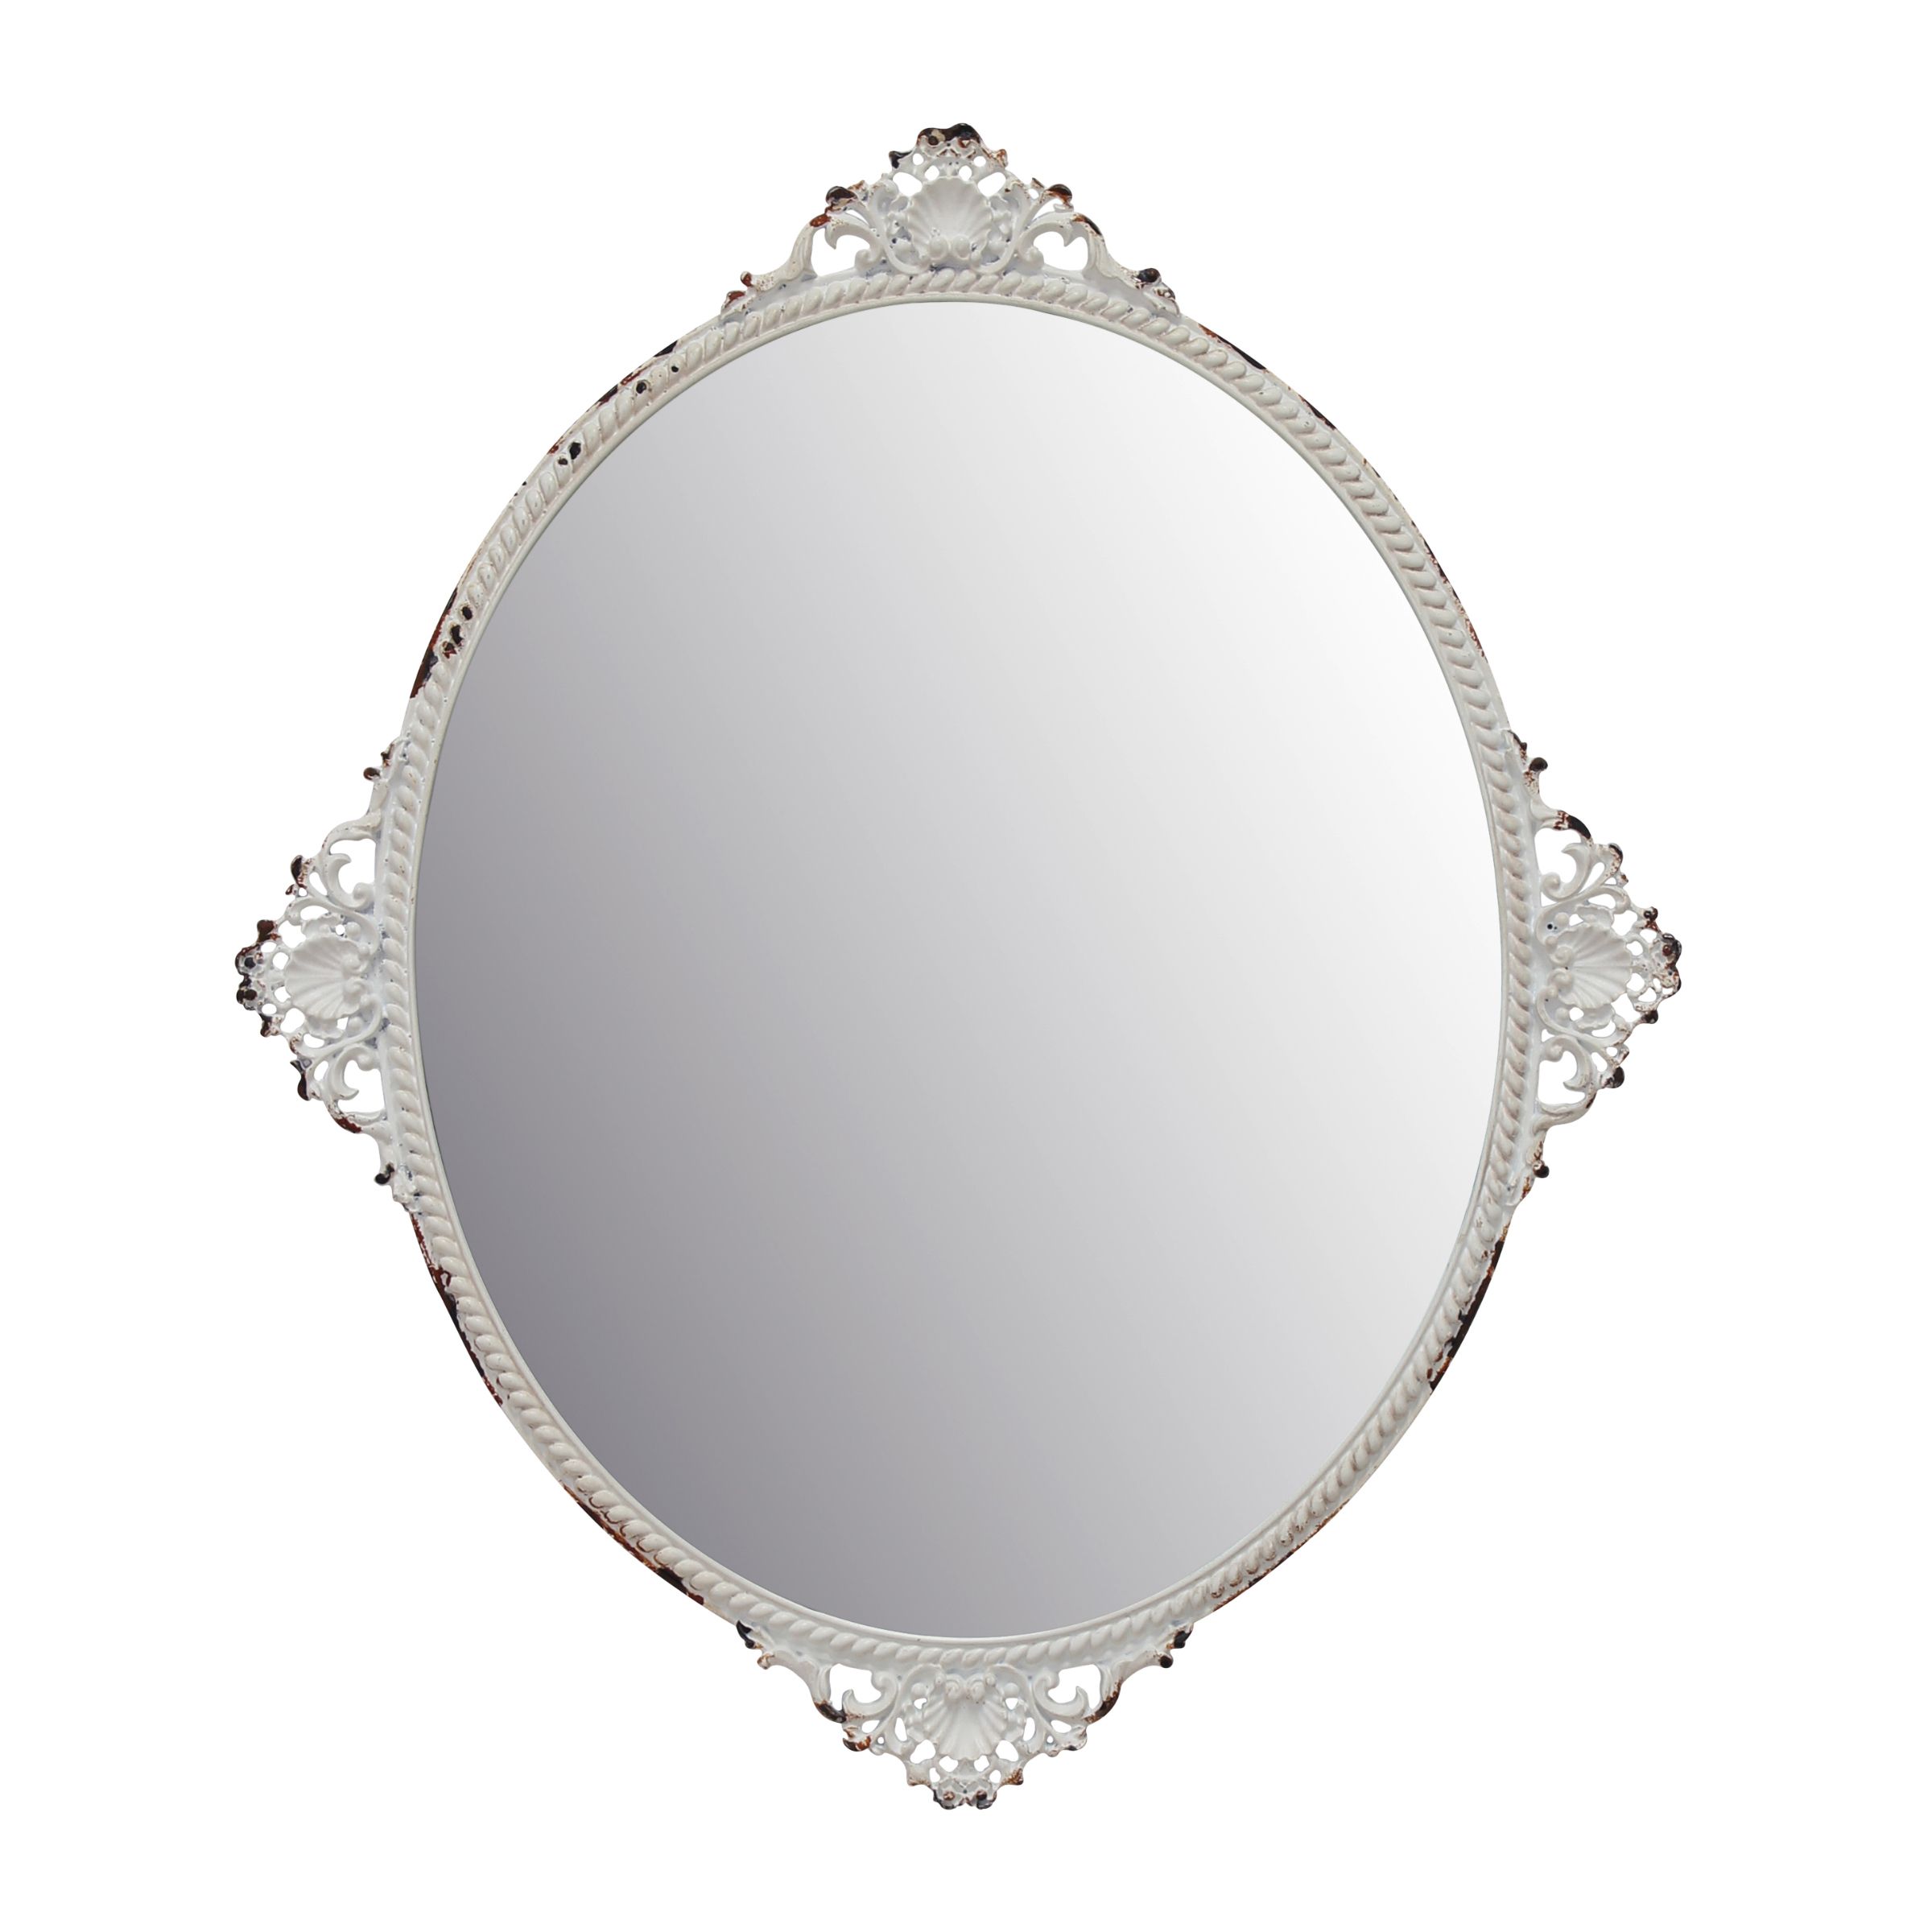 Oval Wall Rustic Mirror With Worn White Vintage Metal Decorative With Regard To Lajoie Rustic Accent Mirrors (View 13 of 15)